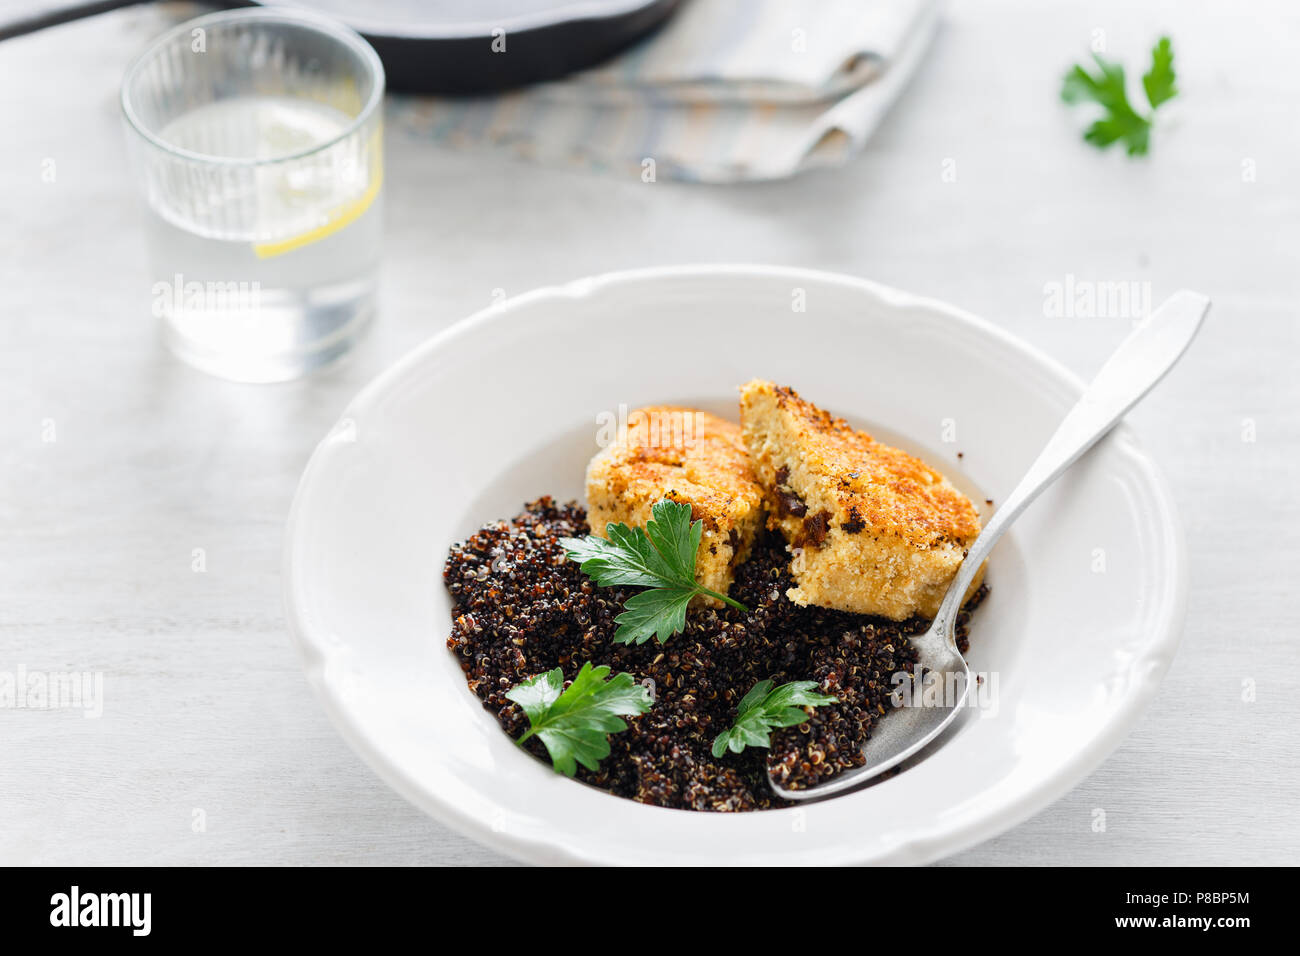 Vegetarian dinner table. Plate with black quinoa and oatmeal cutlets with prunes on white wooden table with lemon water close up Stock Photo